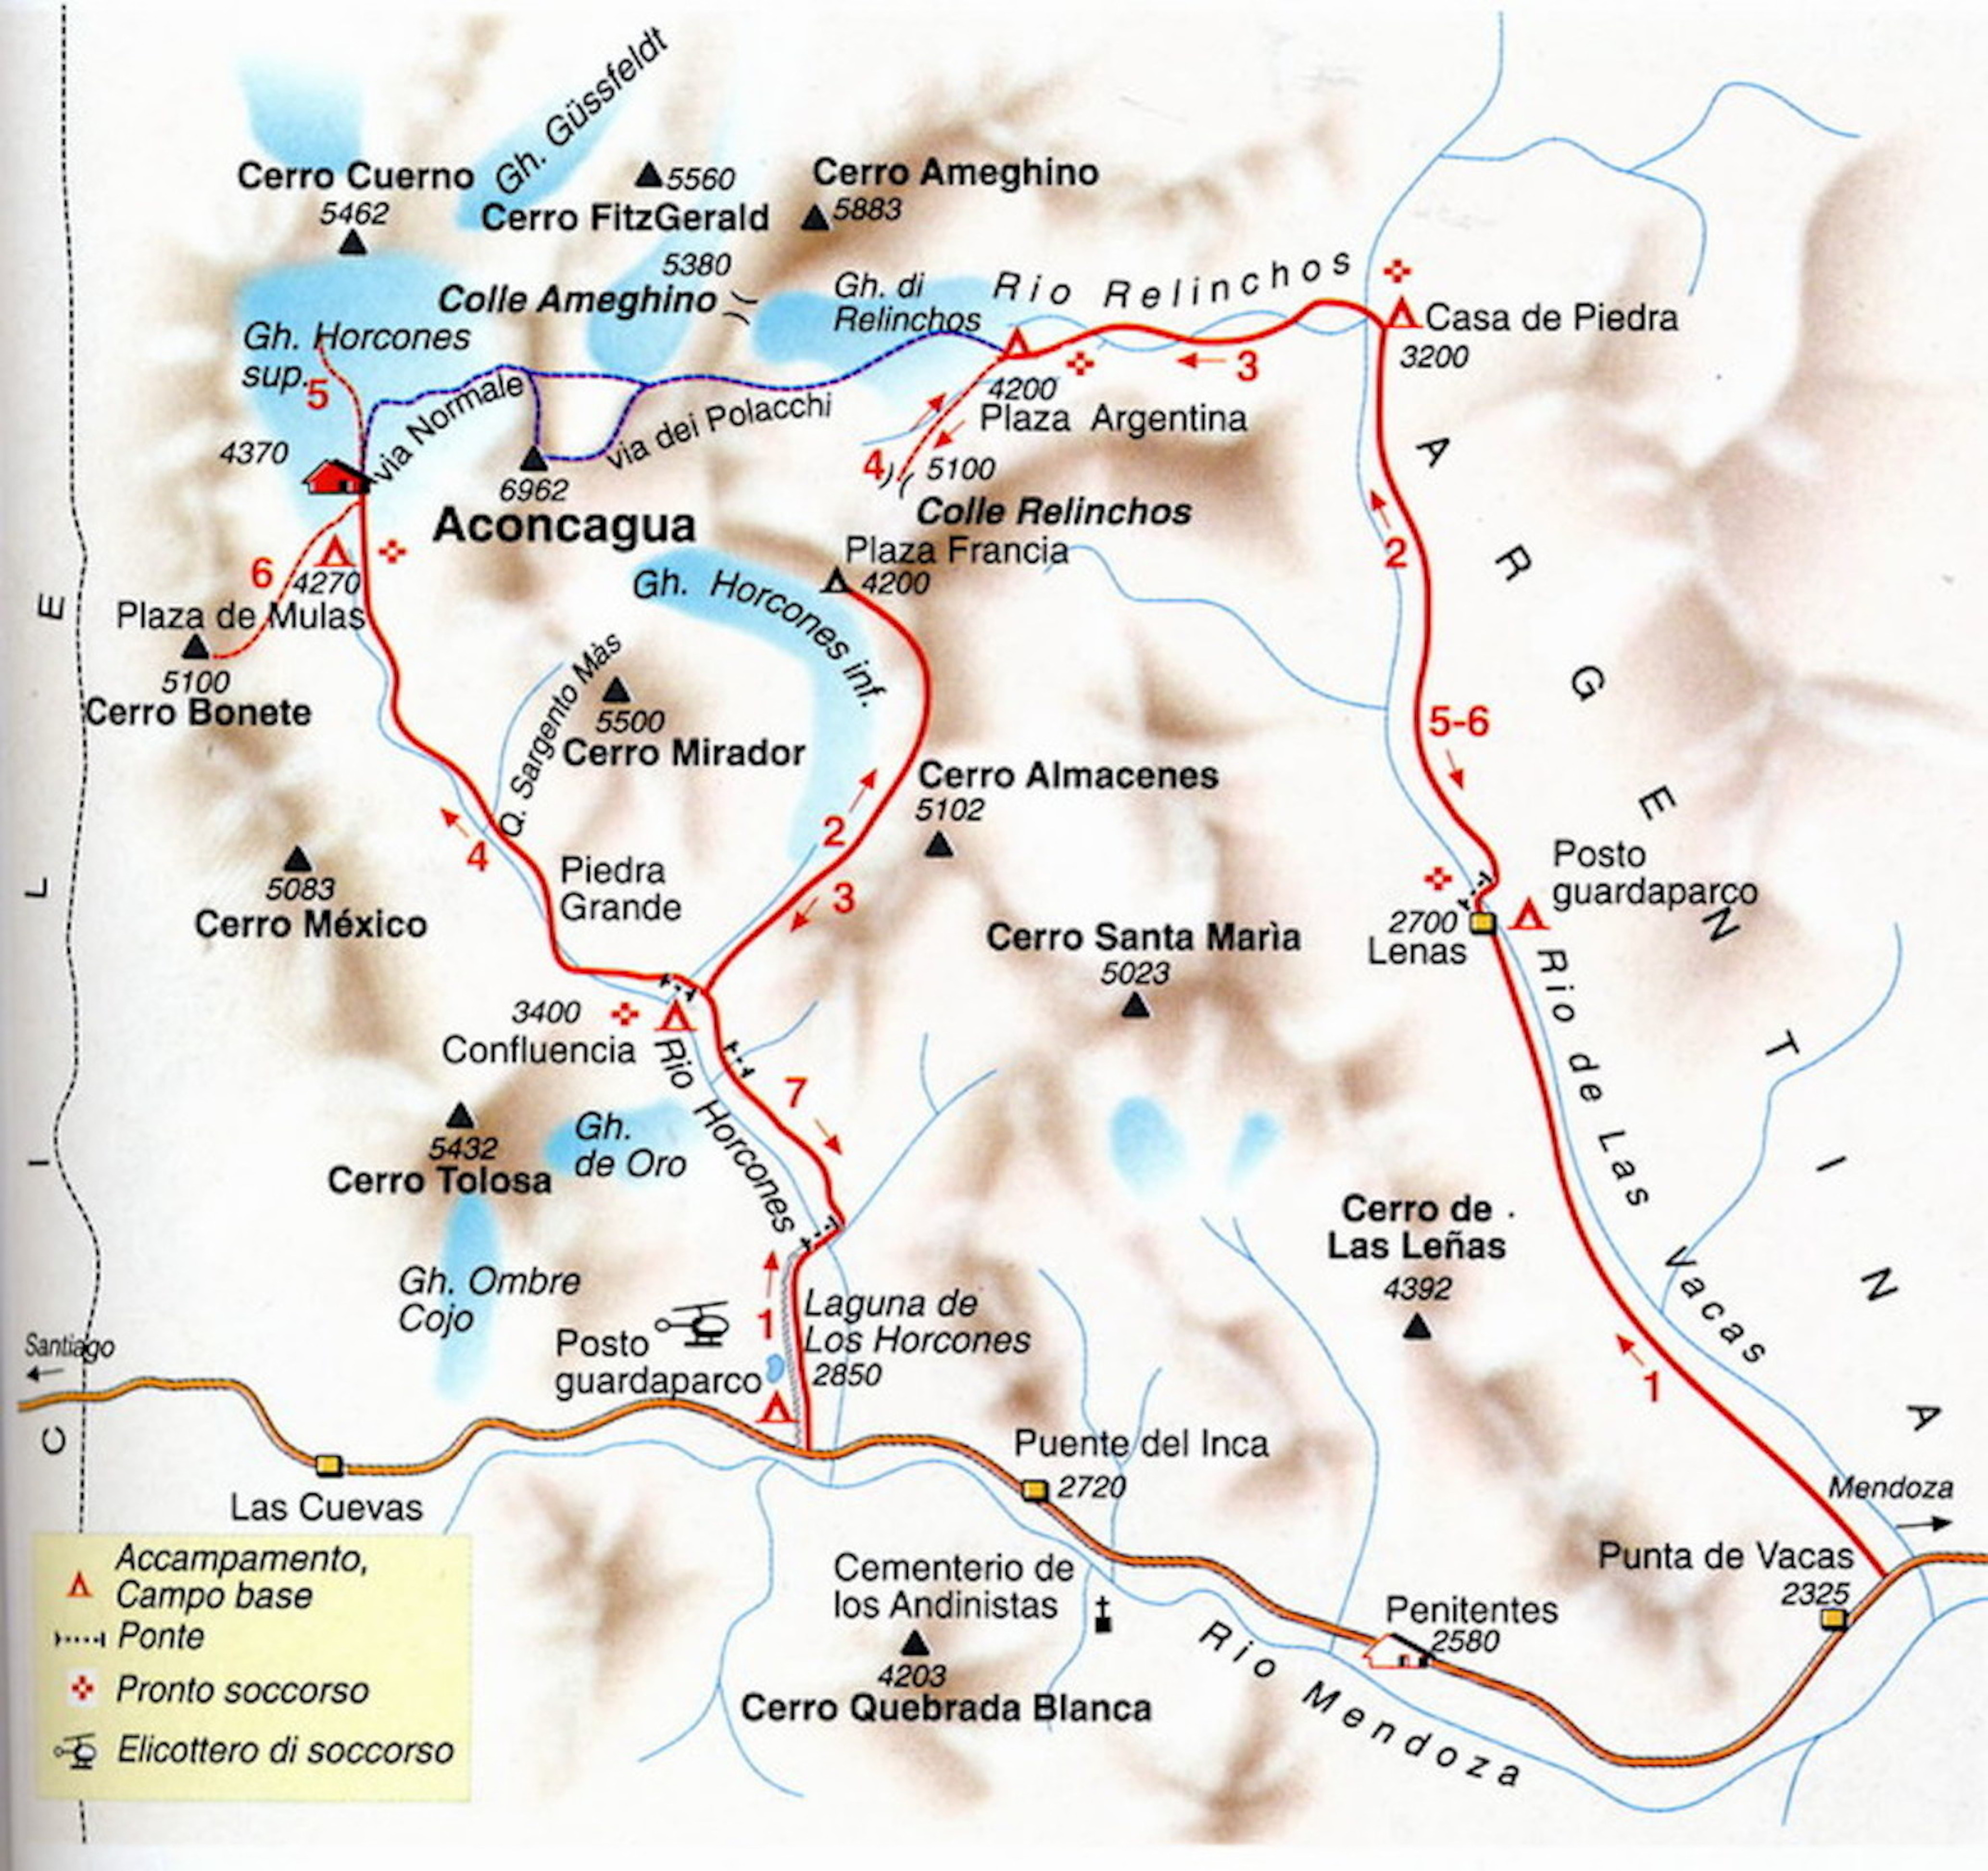 The routes up Aconcagua